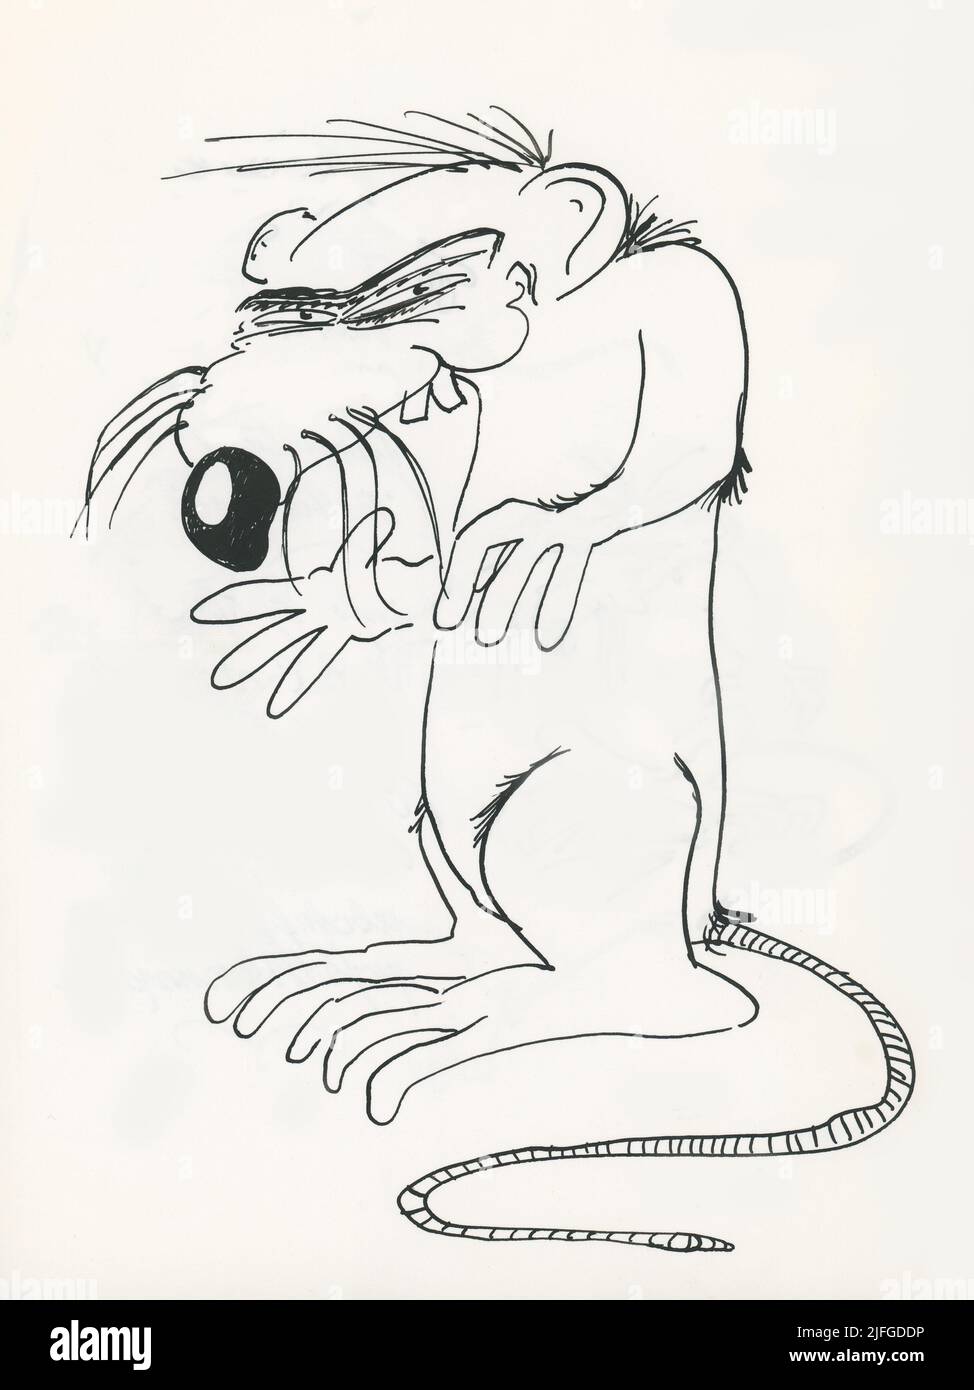 Drawing of not so friendly looking rat. He looks evil and sneaky Stock Photo